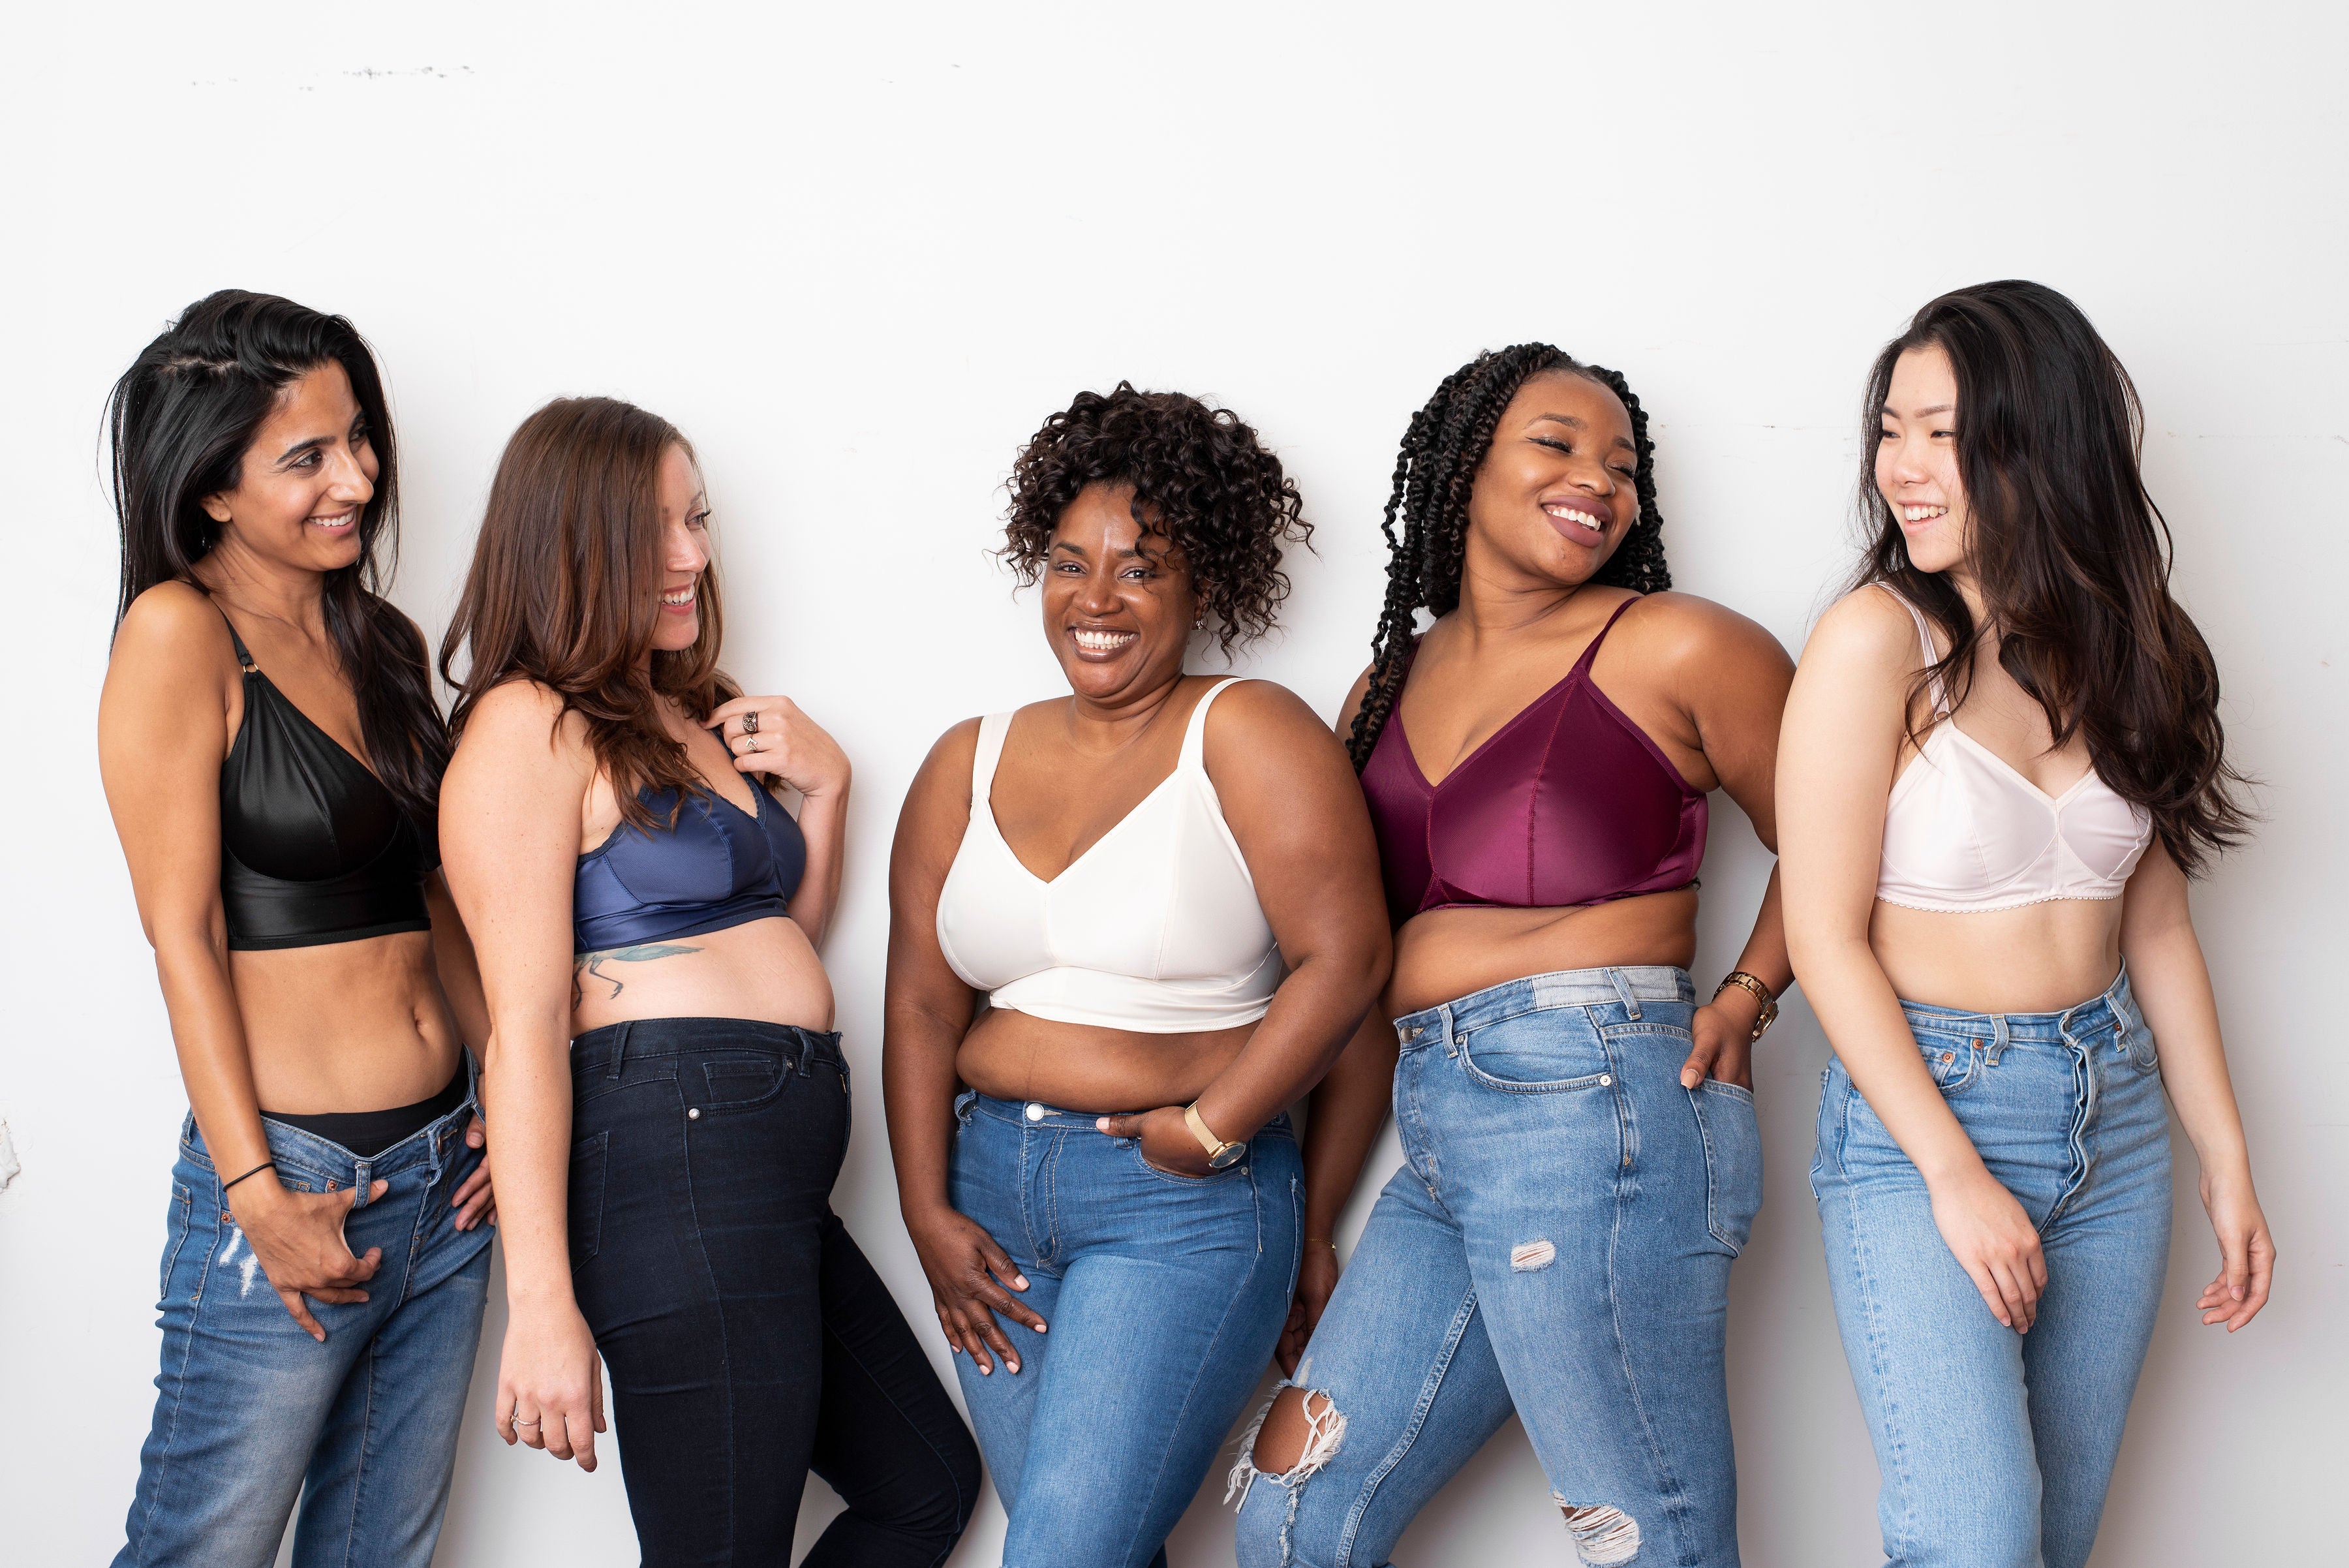 Bralette vs Bra: What's The Difference Between Bralette And Bra